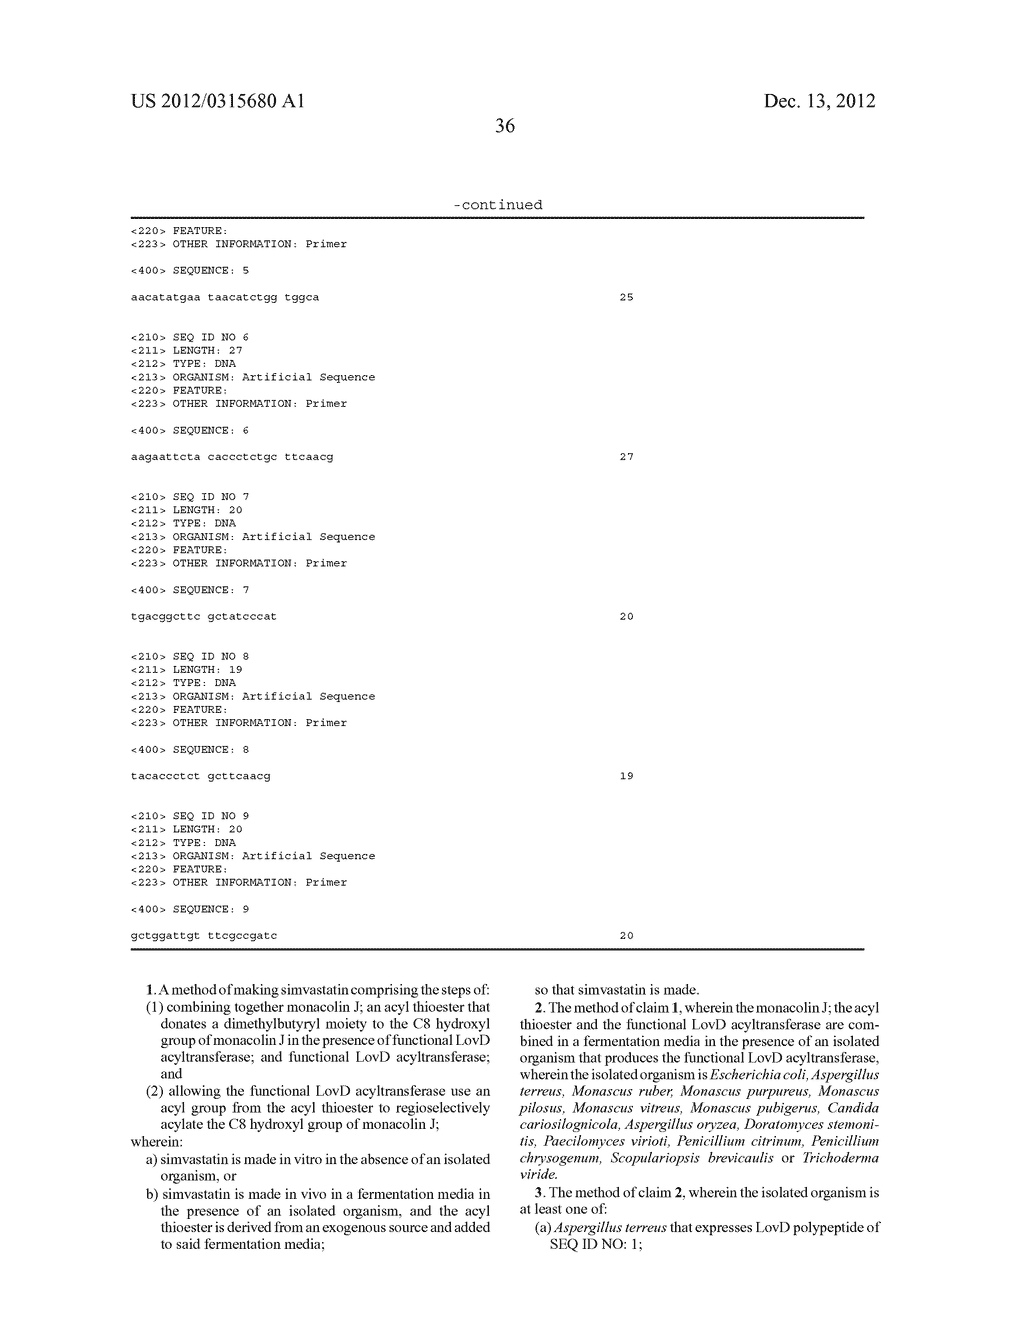 METHODS AND MATERIALS FOR MAKING SIMVASTATIN AND RELATED COMPOUNDS - diagram, schematic, and image 61